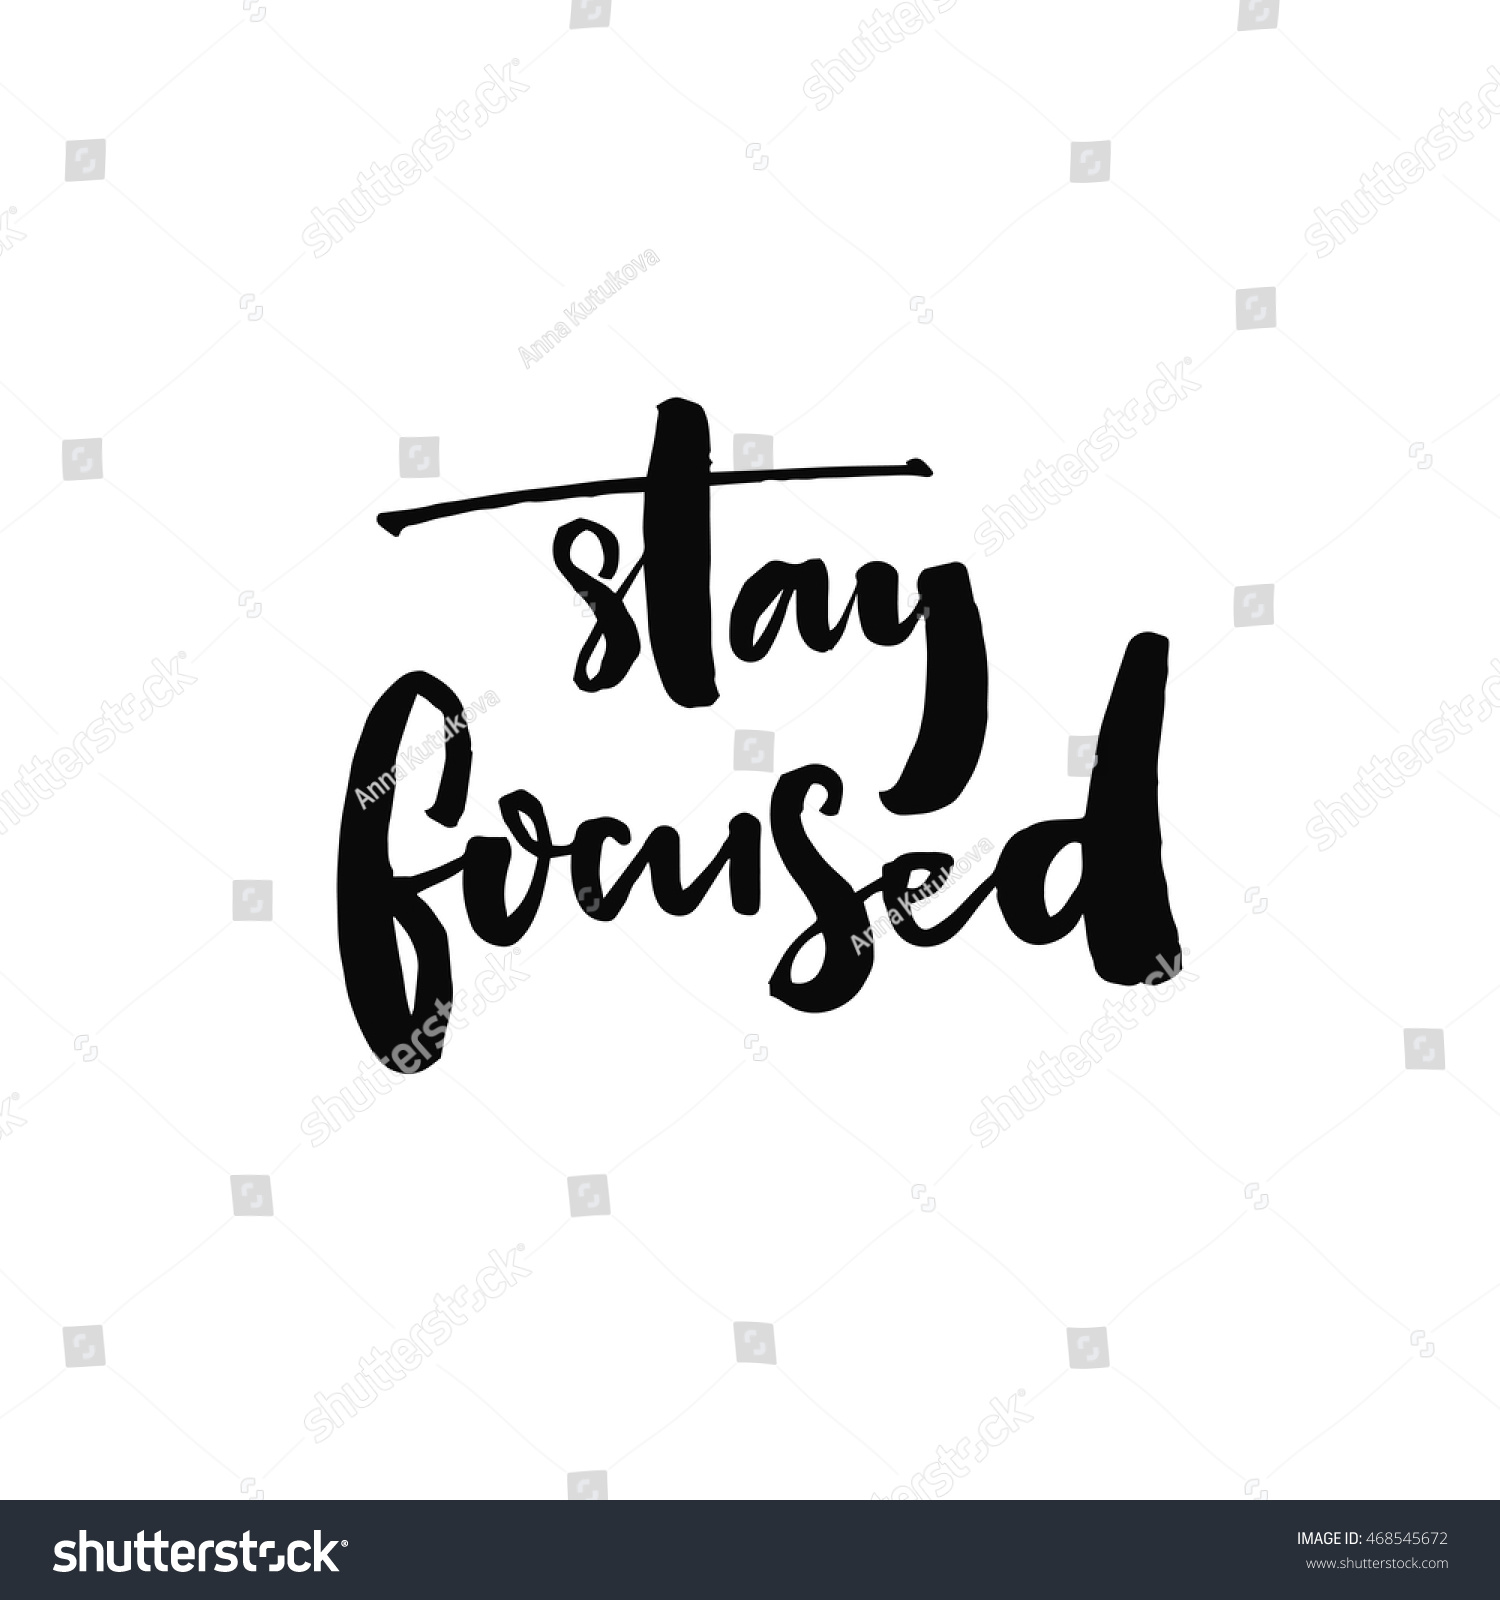 SVG of Stay focused. Motivation quote about productivity and concentration on the work and study process. Black vector brush lettering inscription isolated on white background svg